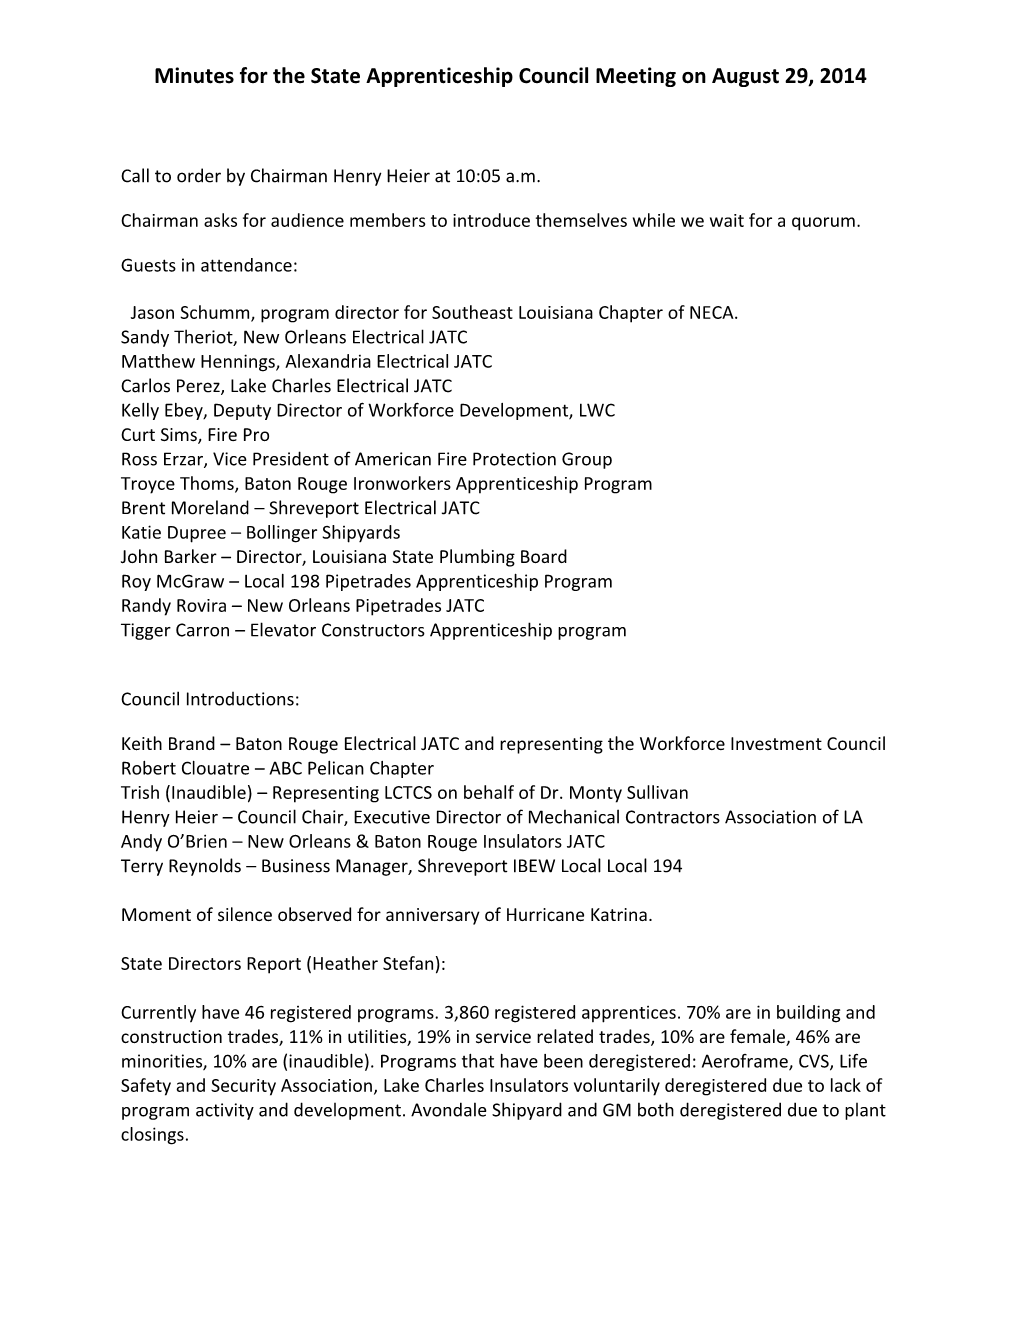 Minutes for the State Apprenticeship Council Meeting on August 29, 2014